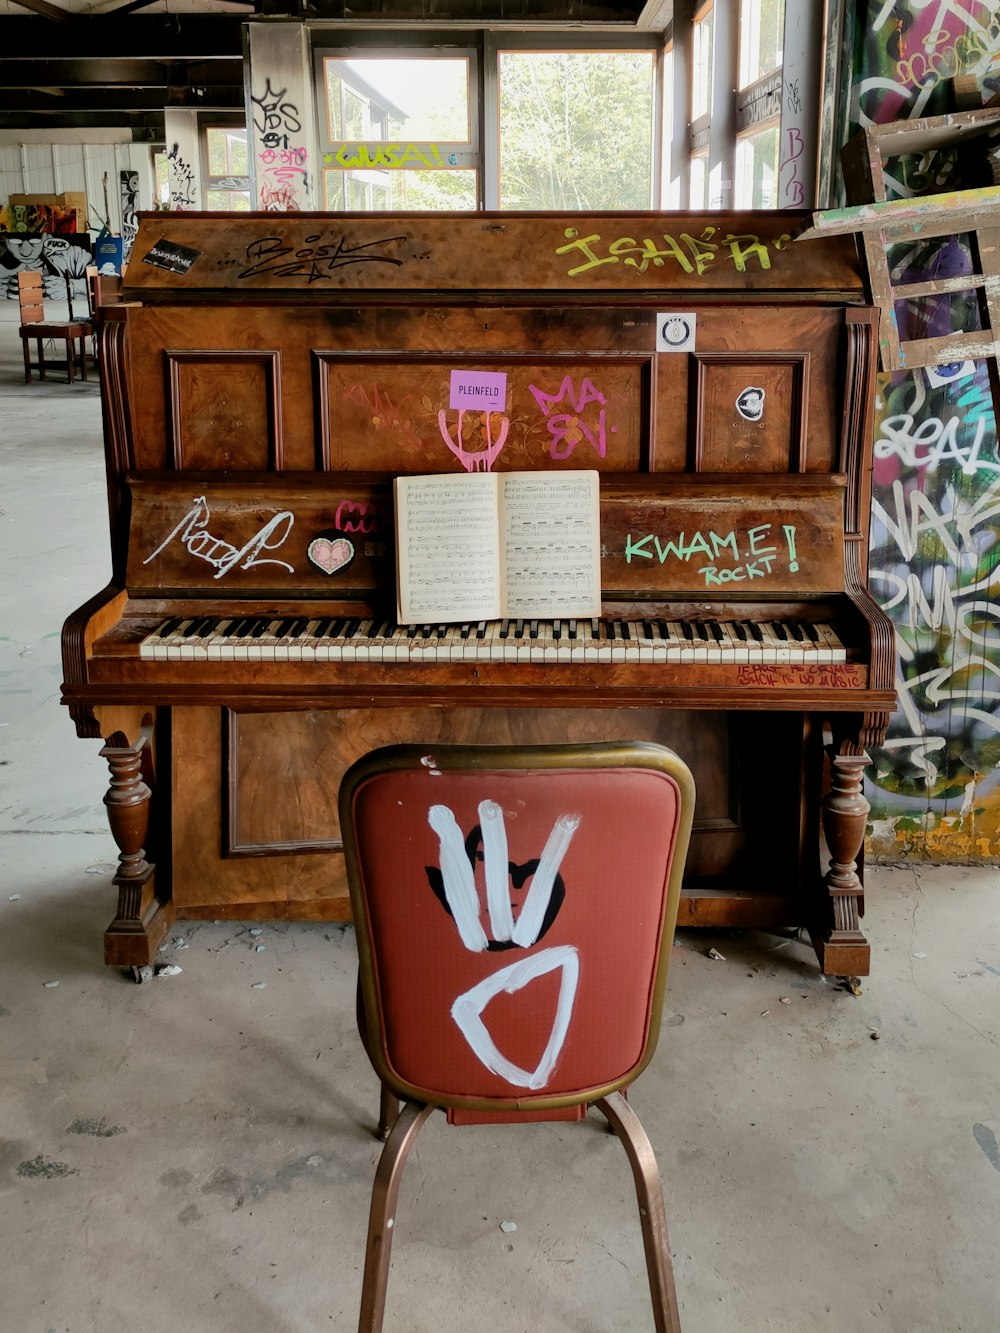 a piano with graffiti on it and a book on top of it